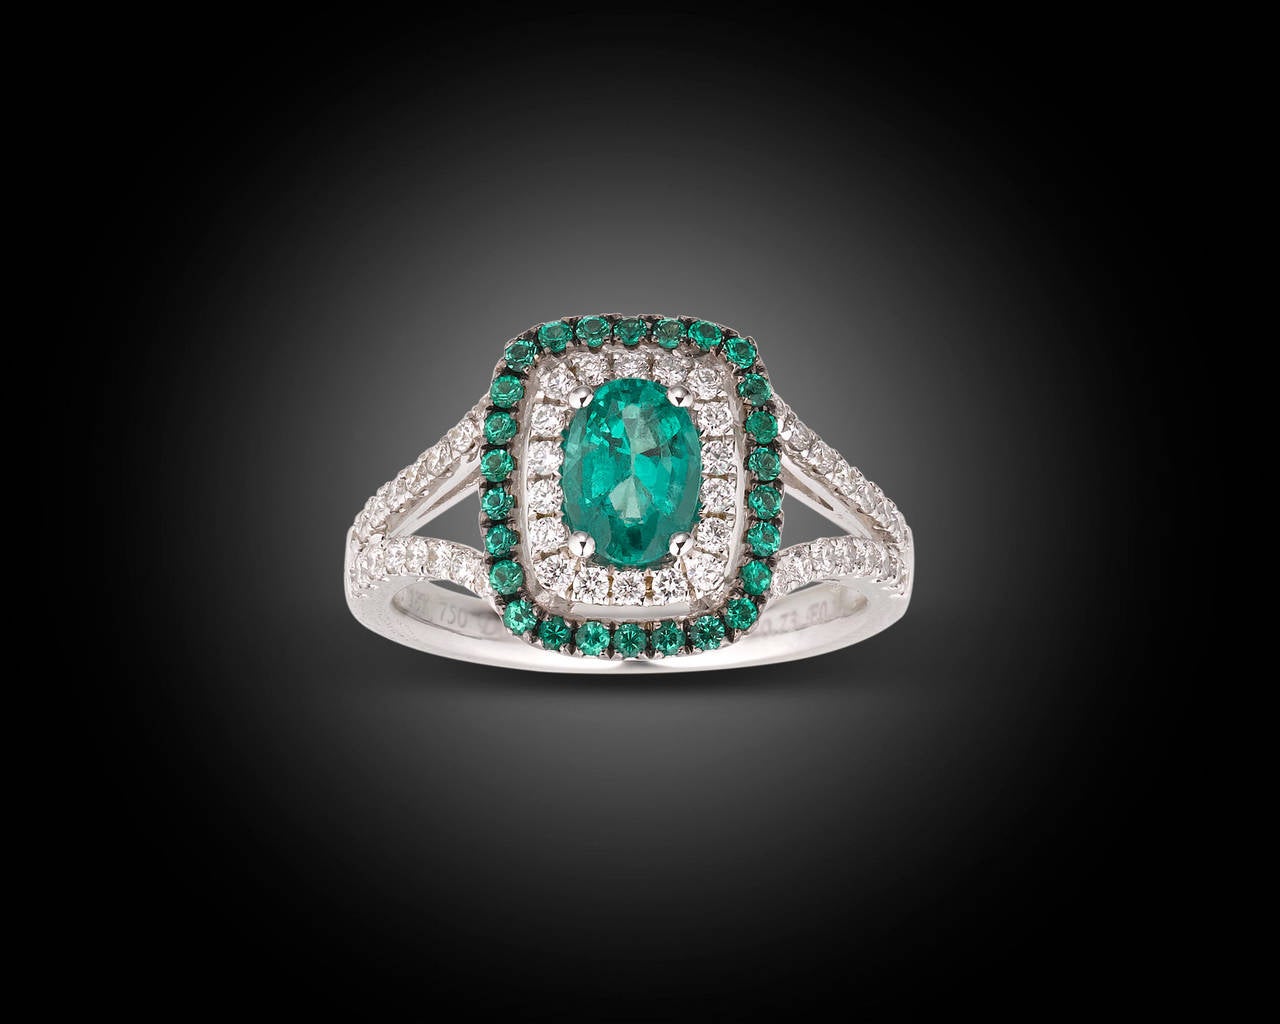 A brilliant 0.90 carat emerald radiates at the center of this enchanting and feminine  ring. The gorgeous colored gemstone is perfectly accented by fifty shimmering diamonds totaling 0.46 carats and twenty-six additional emeralds totaling 0.18